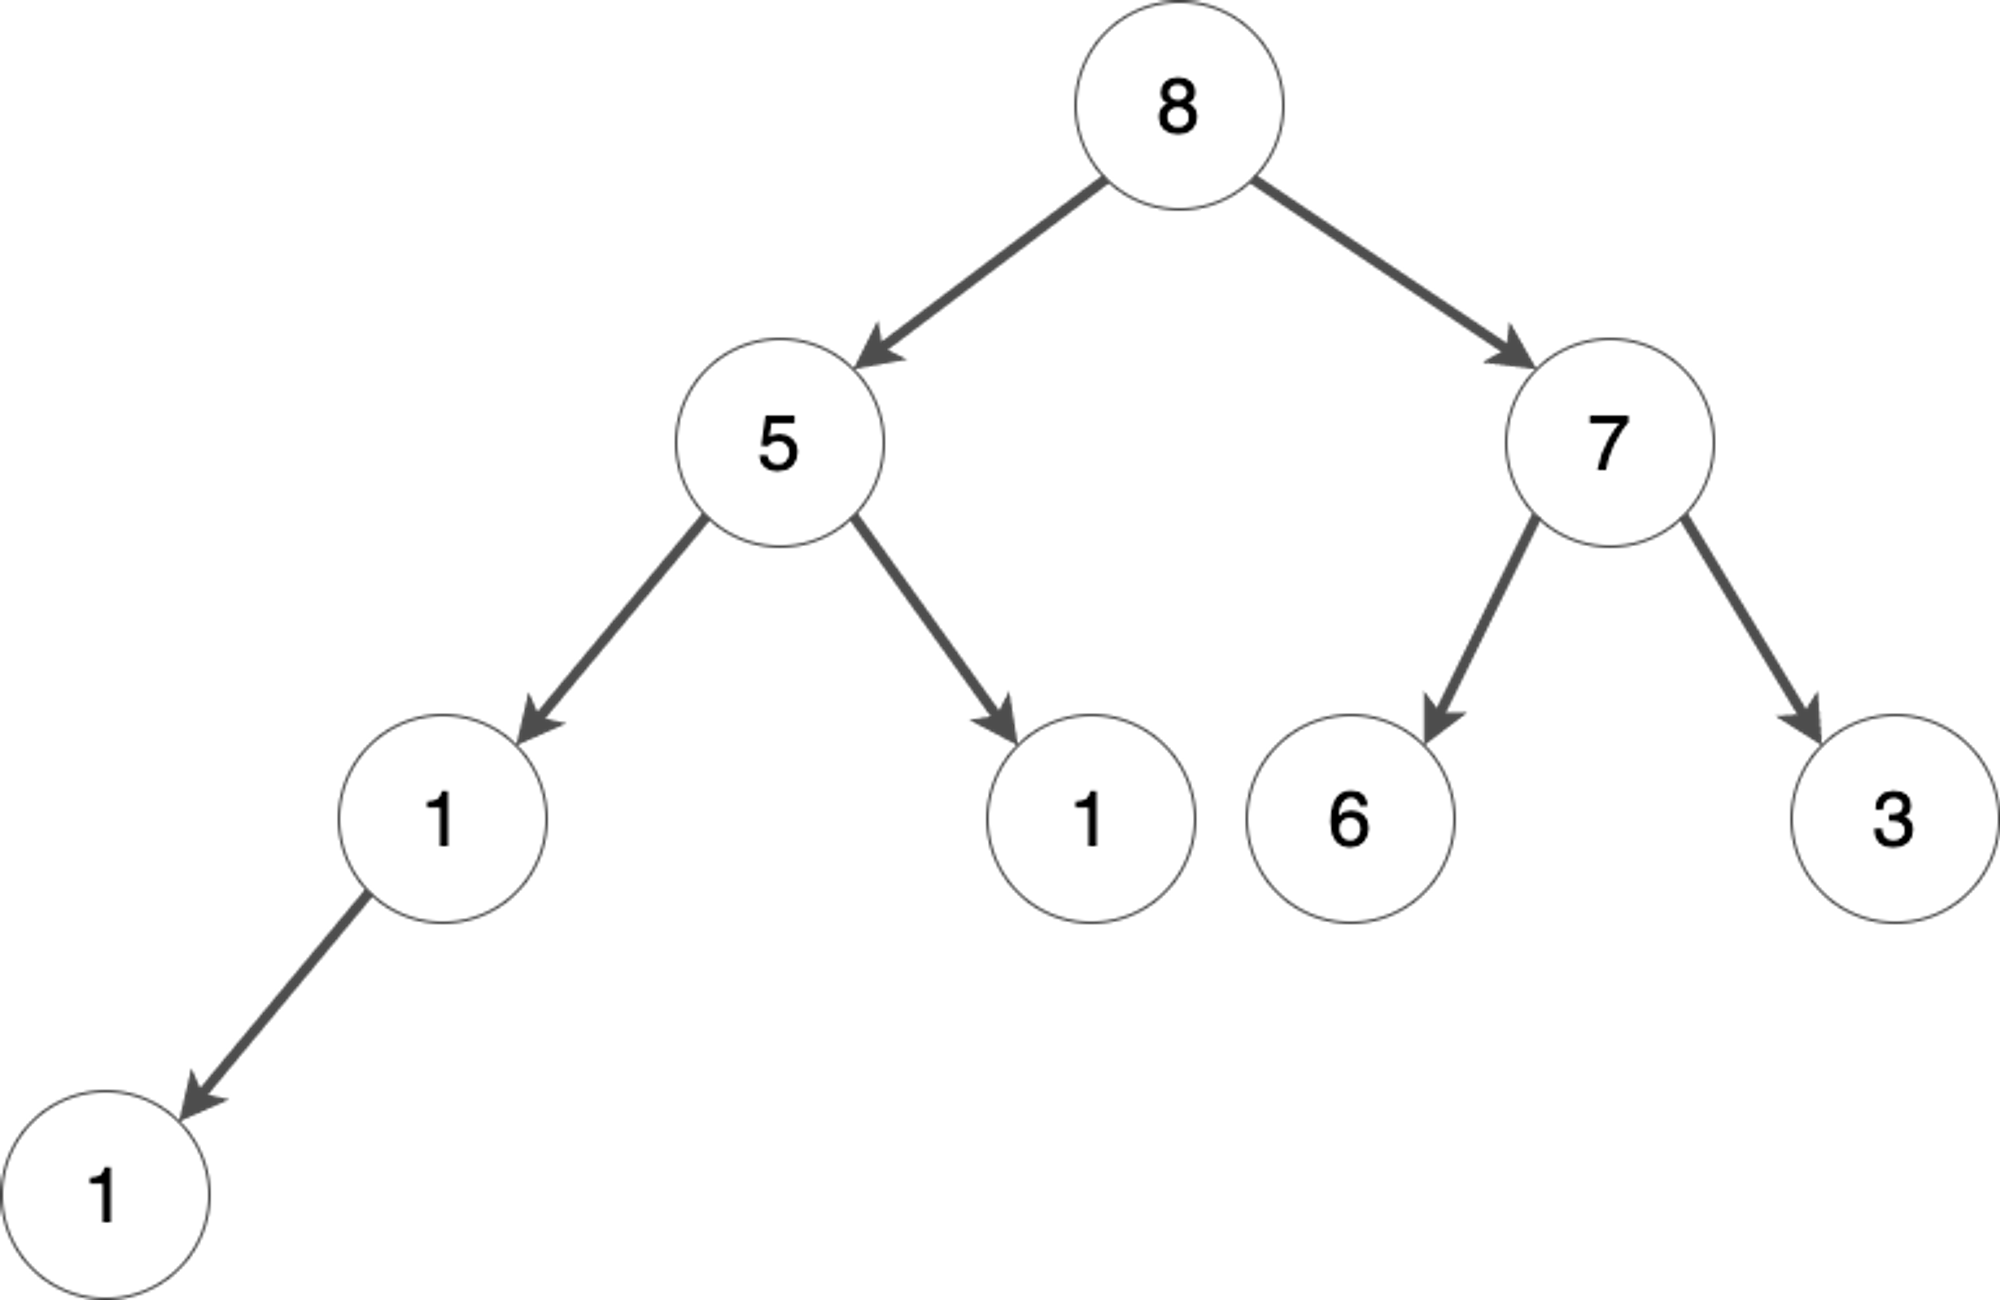 All the parent nodes have a value larger than or equal to their child nodes. Therefore, the heap property is satisfied.